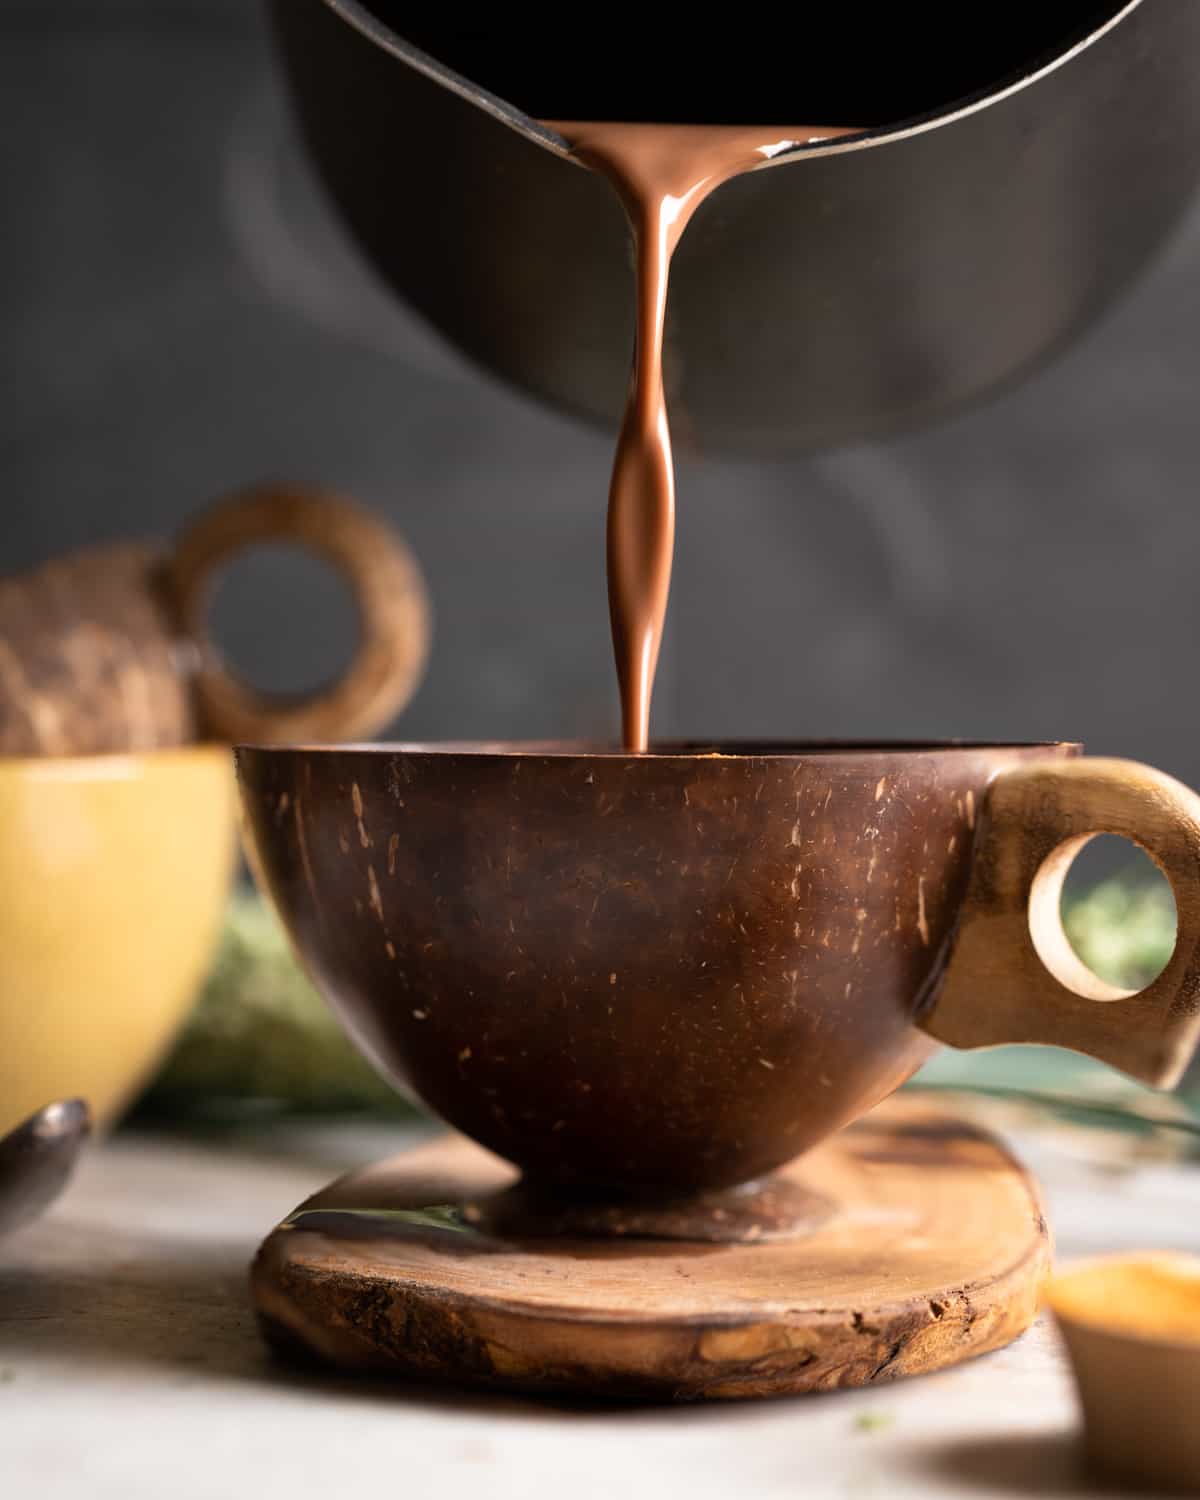 Image of hot chocolate being poured into a wooden mug that is sittig on a wooden cutting board.